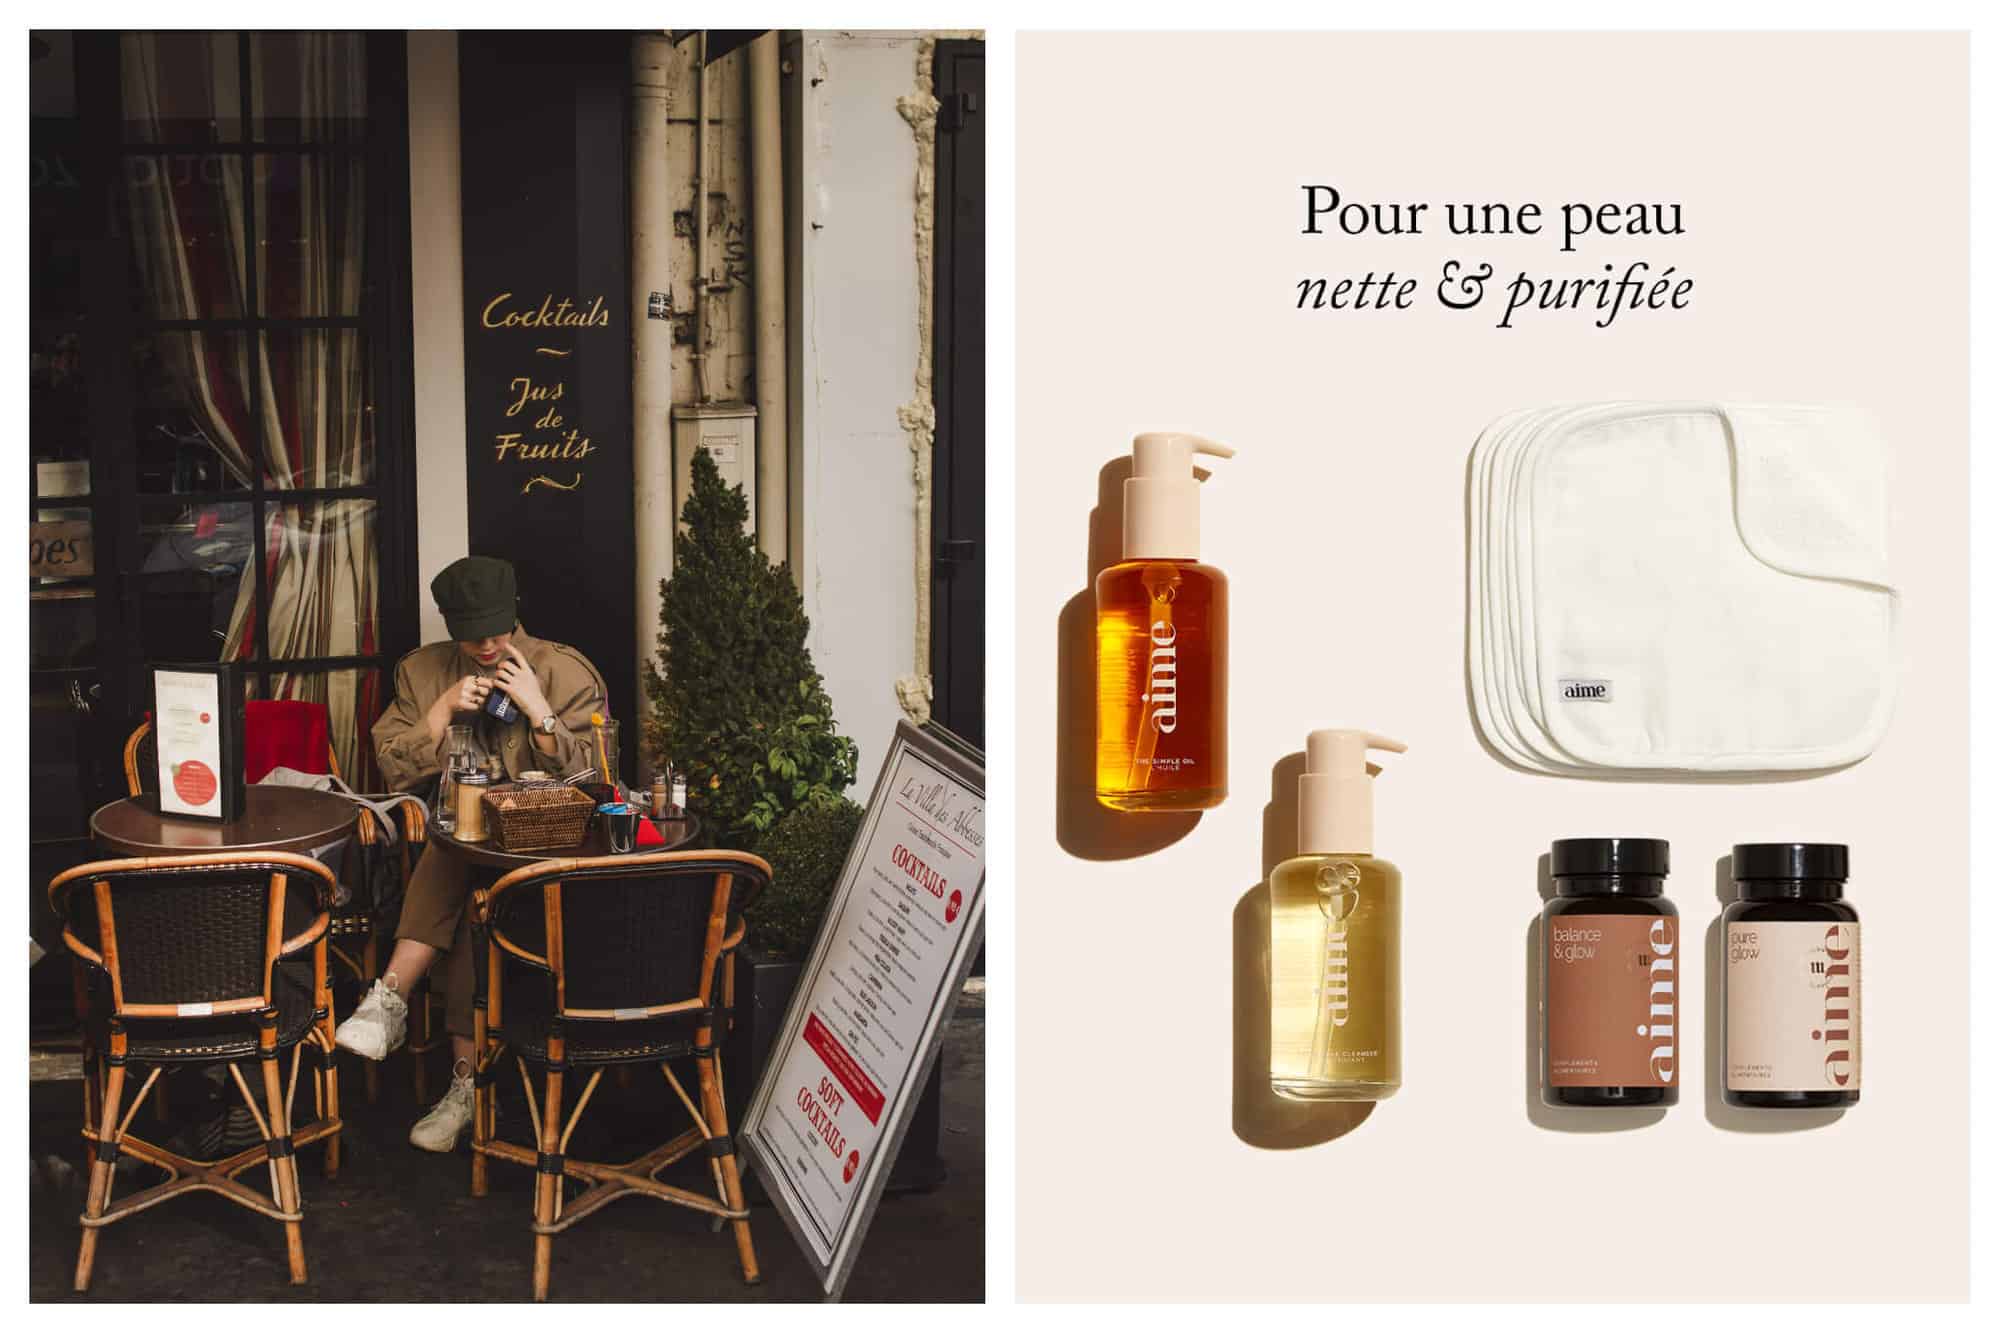 Left: a woman sitting at a table on a Parisian terrasse. Right: the words 'Pour une peau nette & purifiée' above various products by AIME.